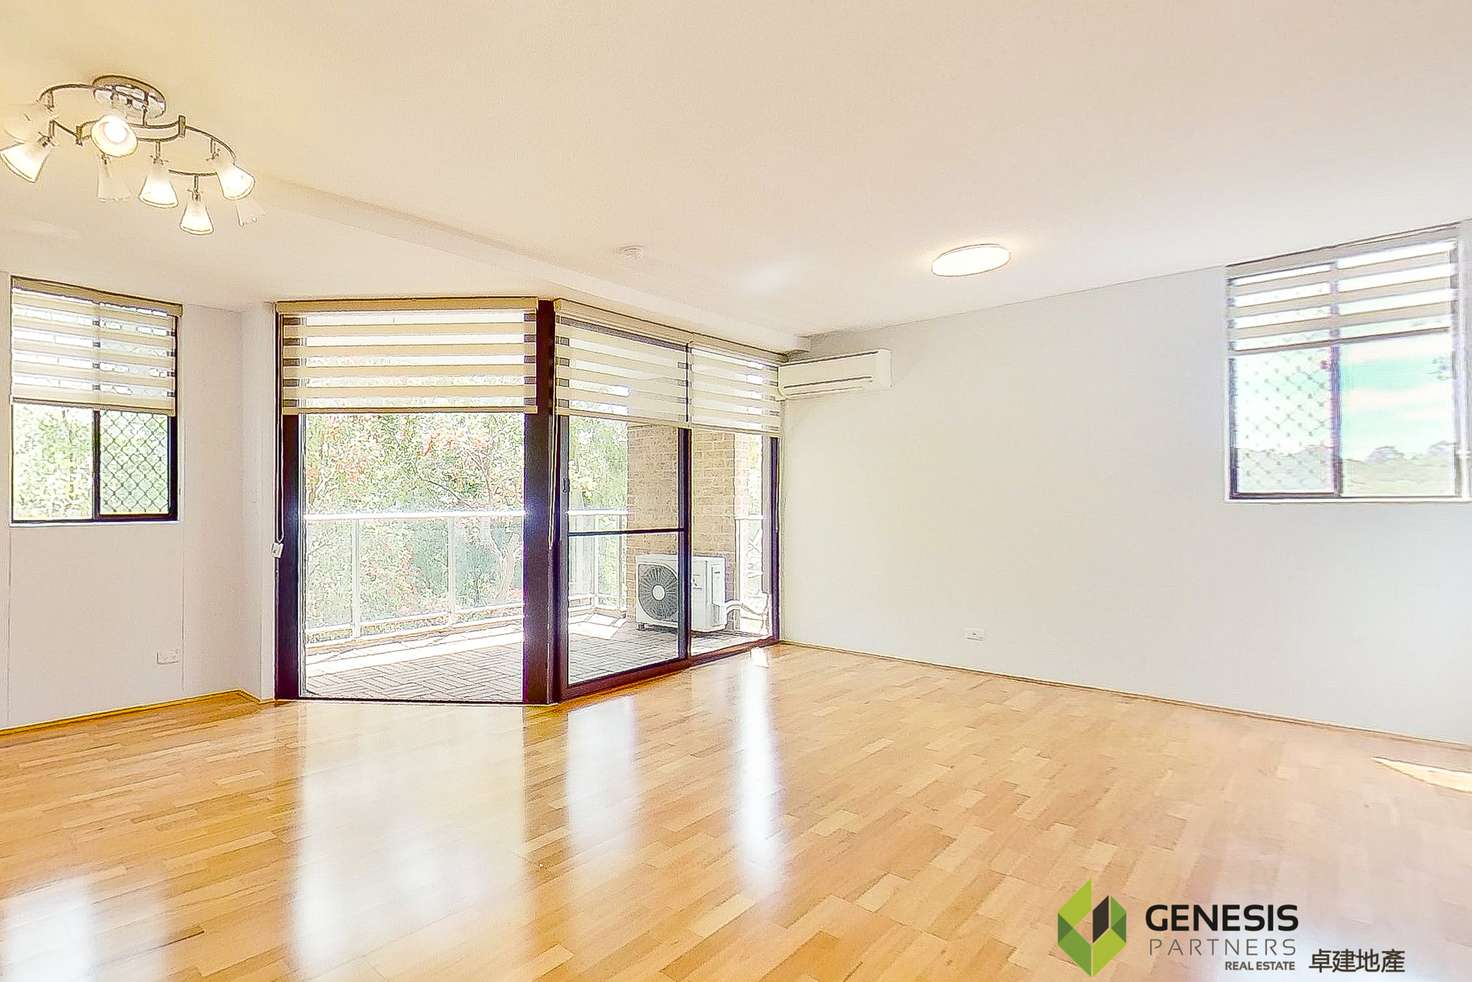 Main view of Homely apartment listing, 8/1 Carlisle Close, Macquarie Park NSW 2113